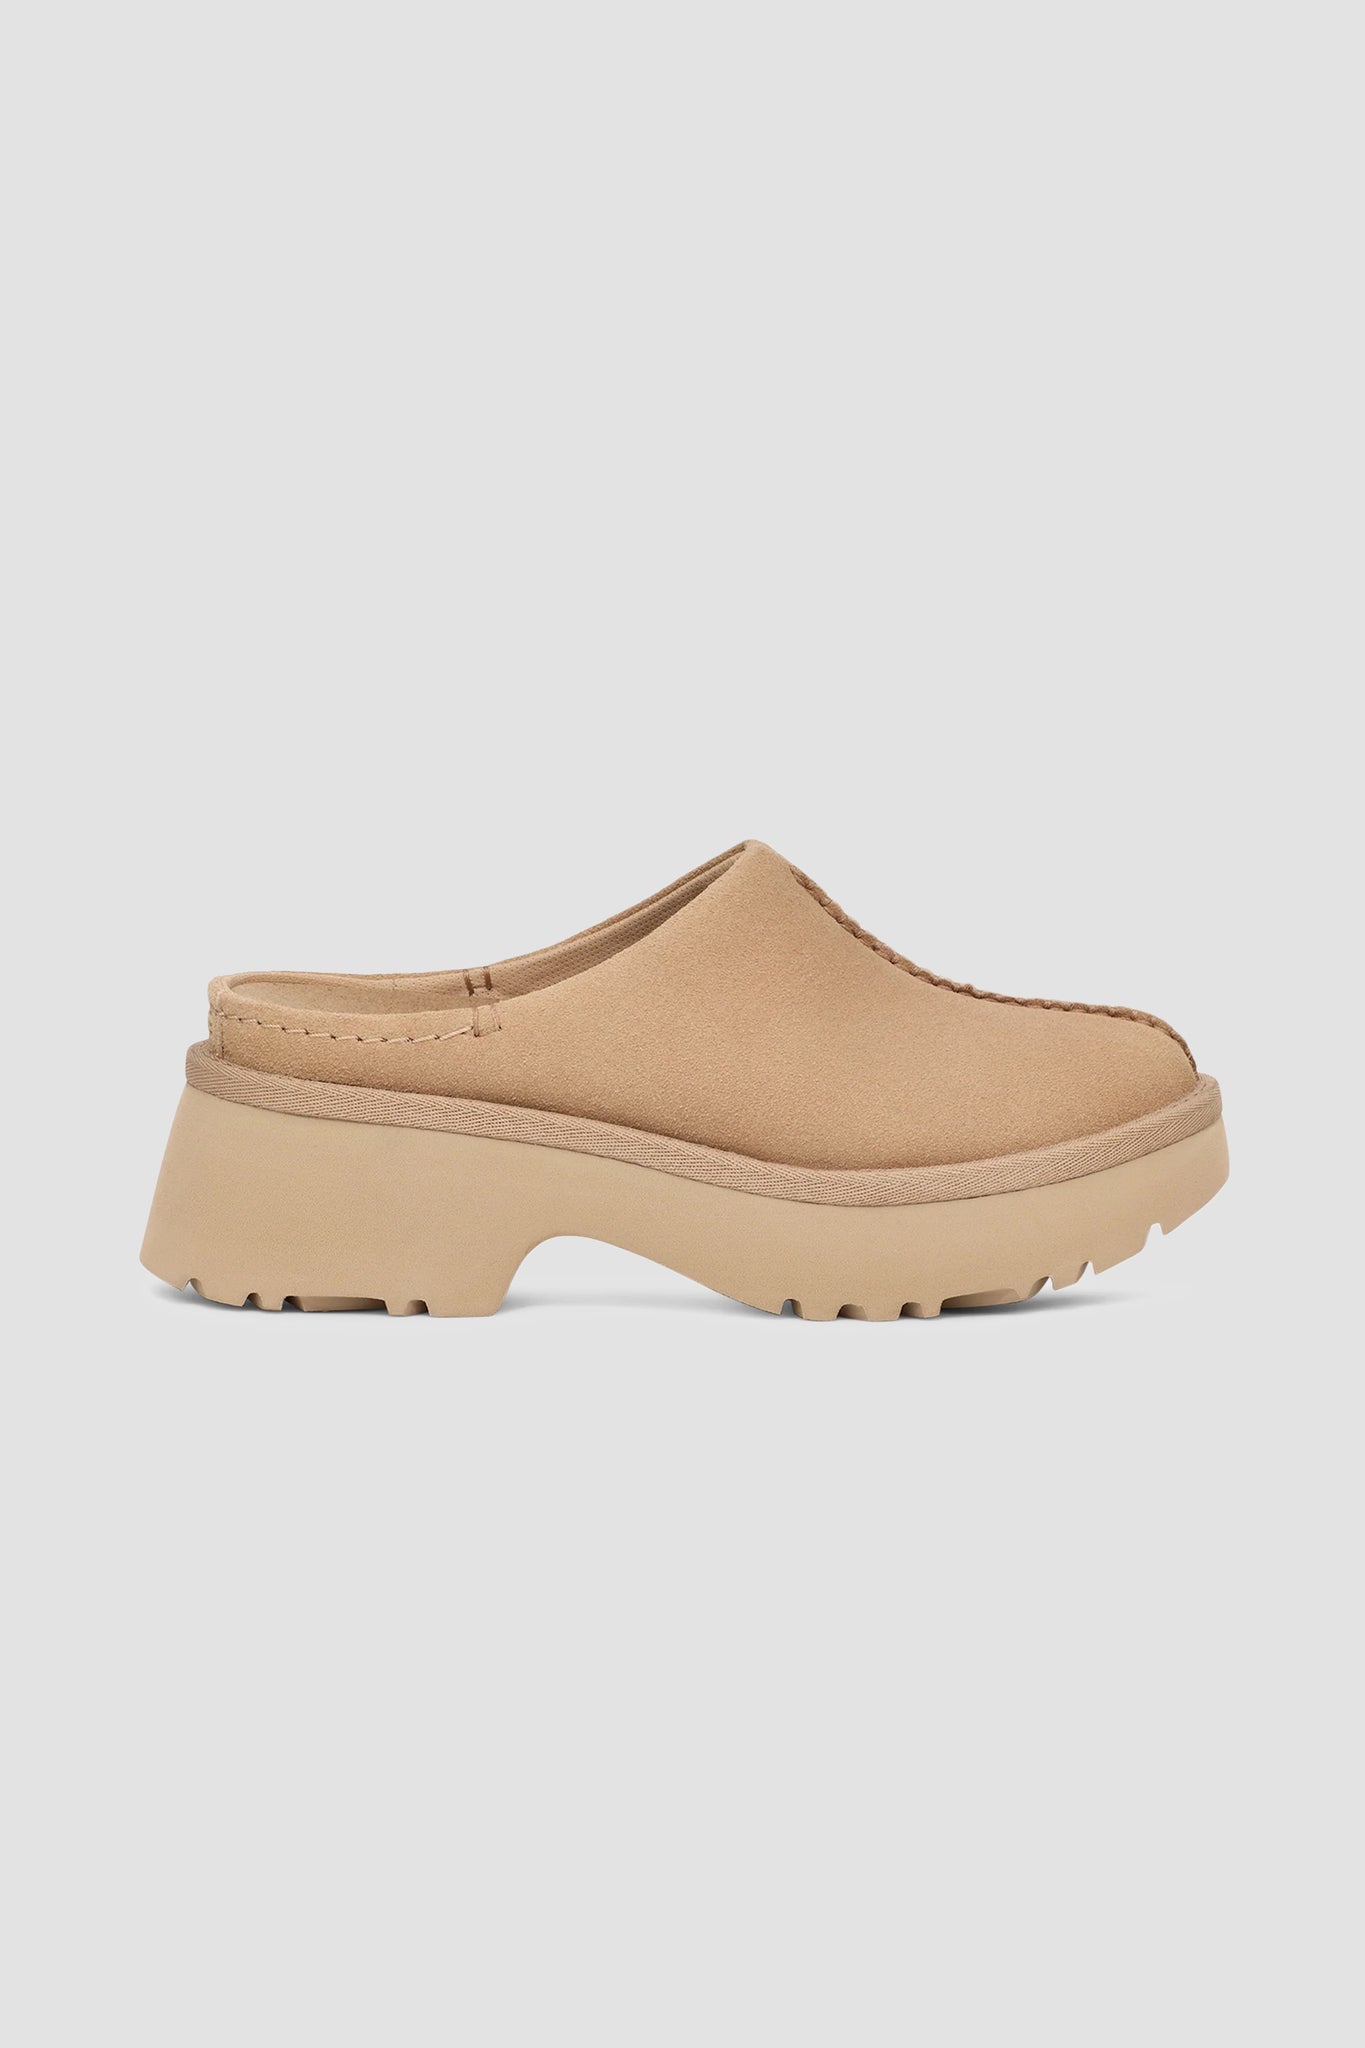 UGG Women's New Heights Clog in Sand